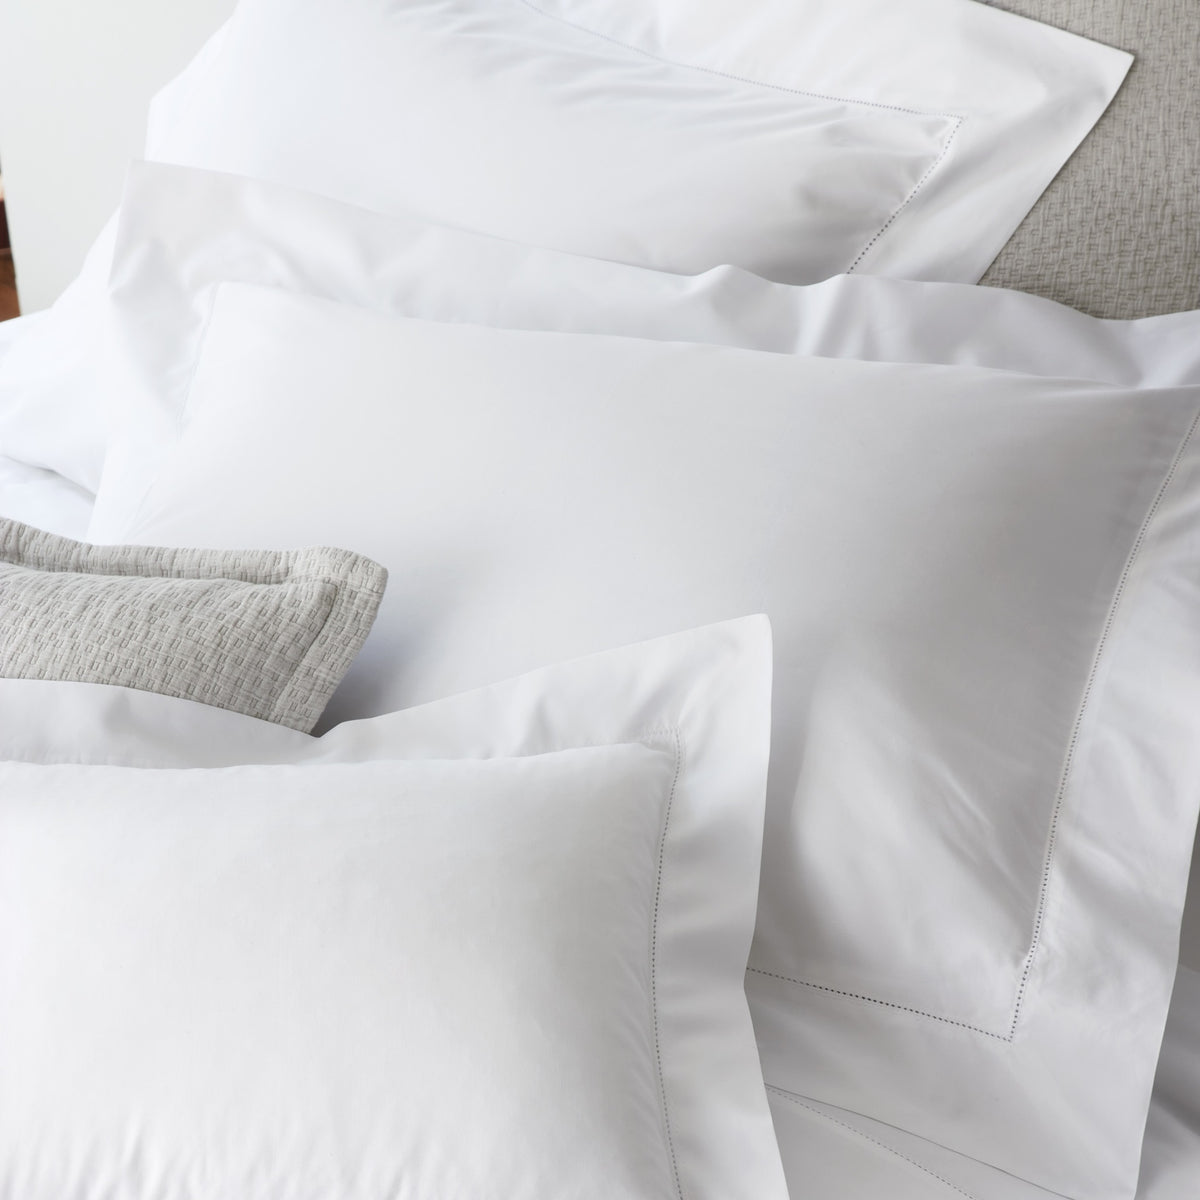 Close Up Image of Matouk Milano Hemstitch Bedding in White Color